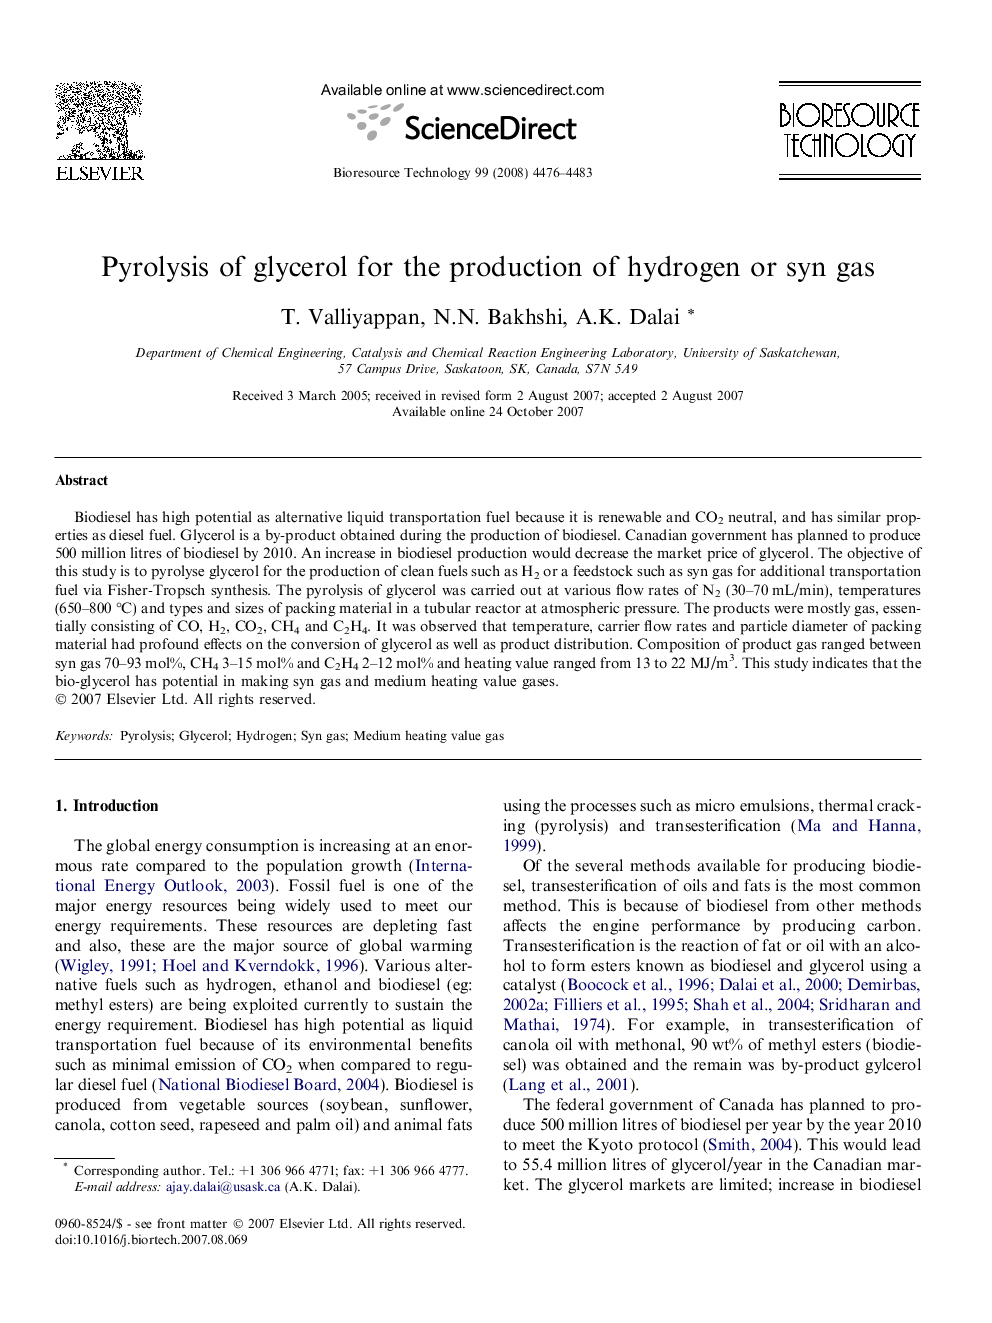 Pyrolysis of glycerol for the production of hydrogen or syn gas